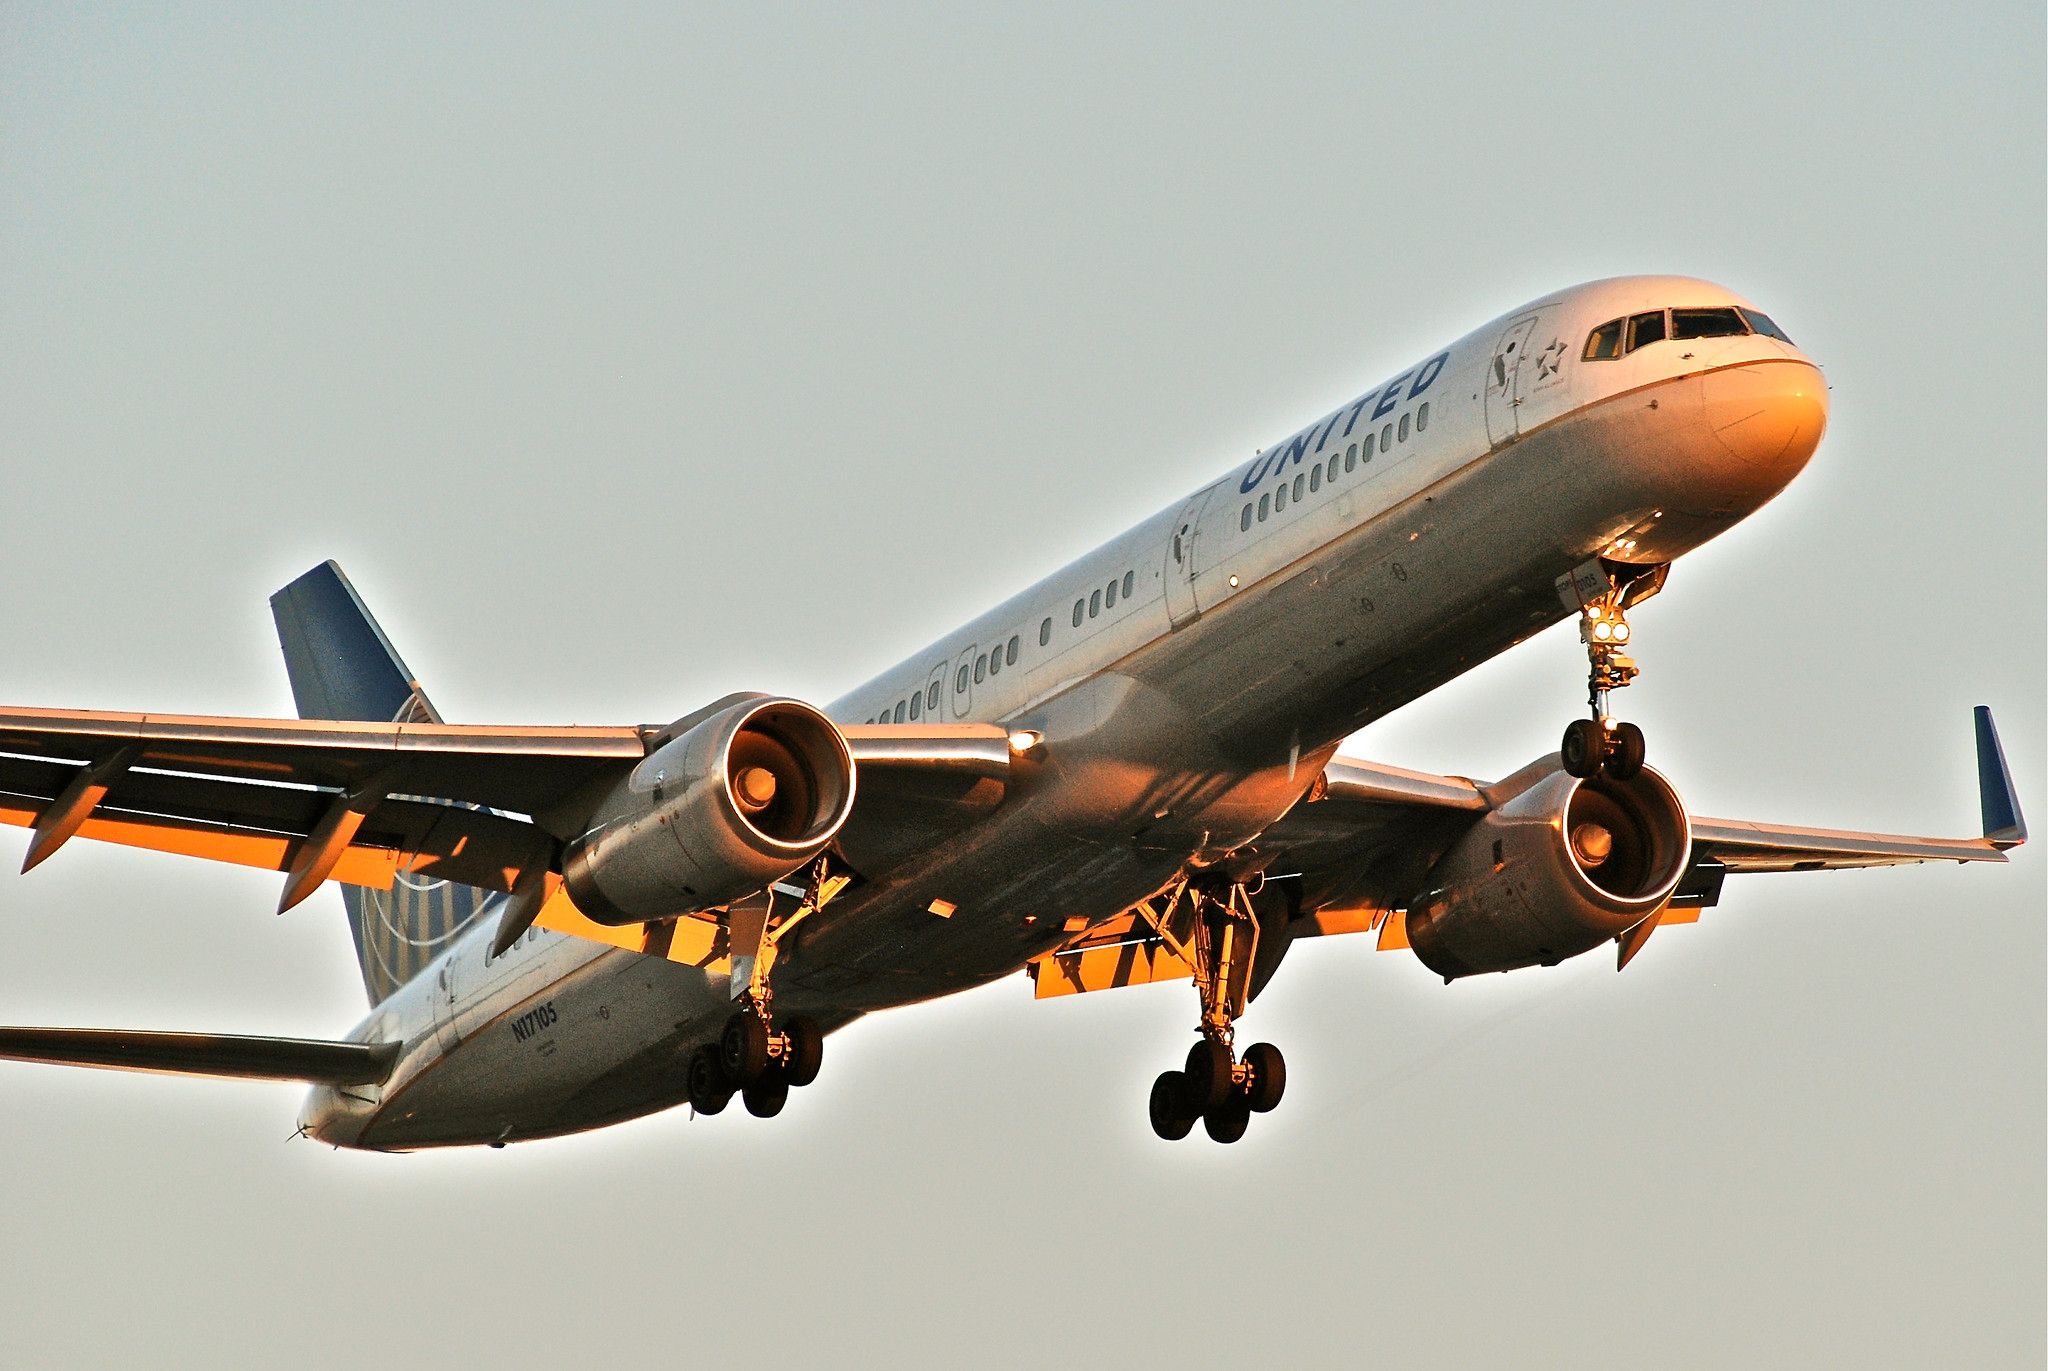 A United Airlines Boeing 757-200 flying in the sky.